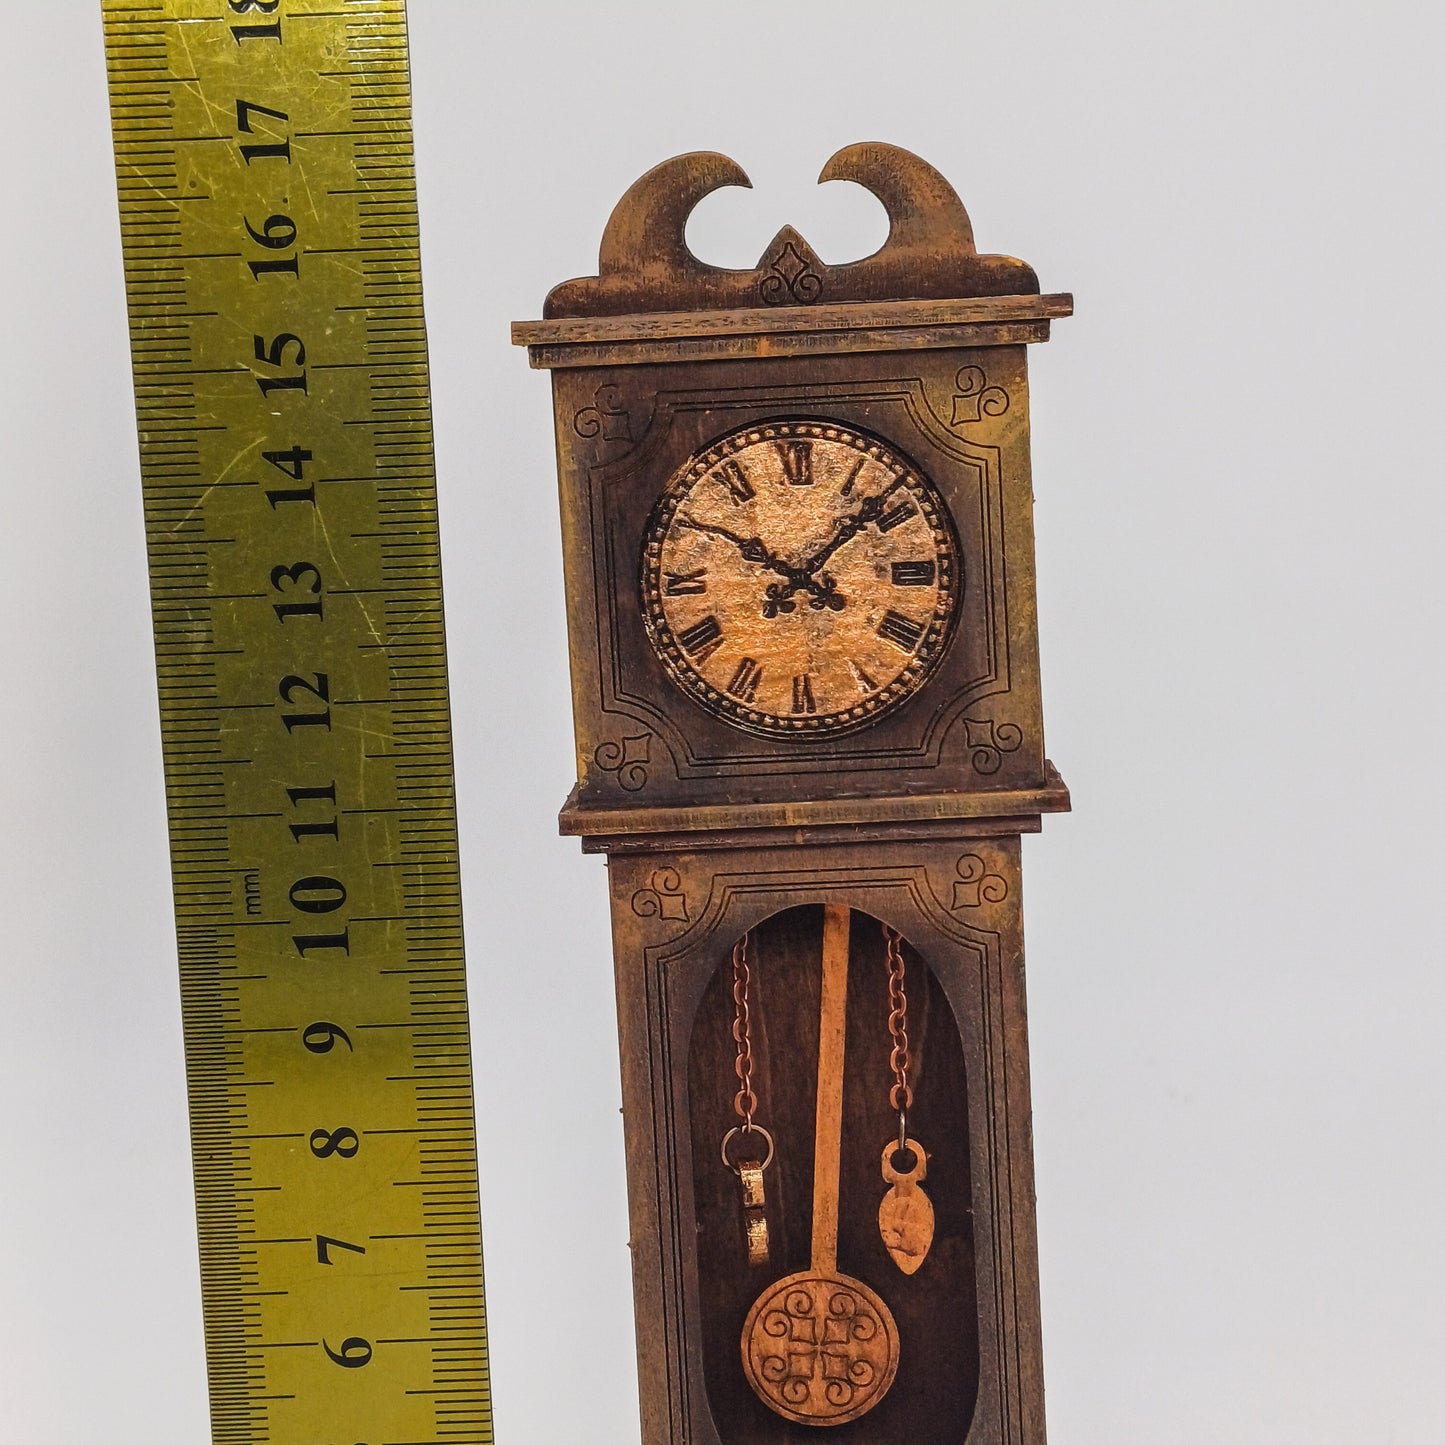 DIY grandfather clock on a scale of 1:12